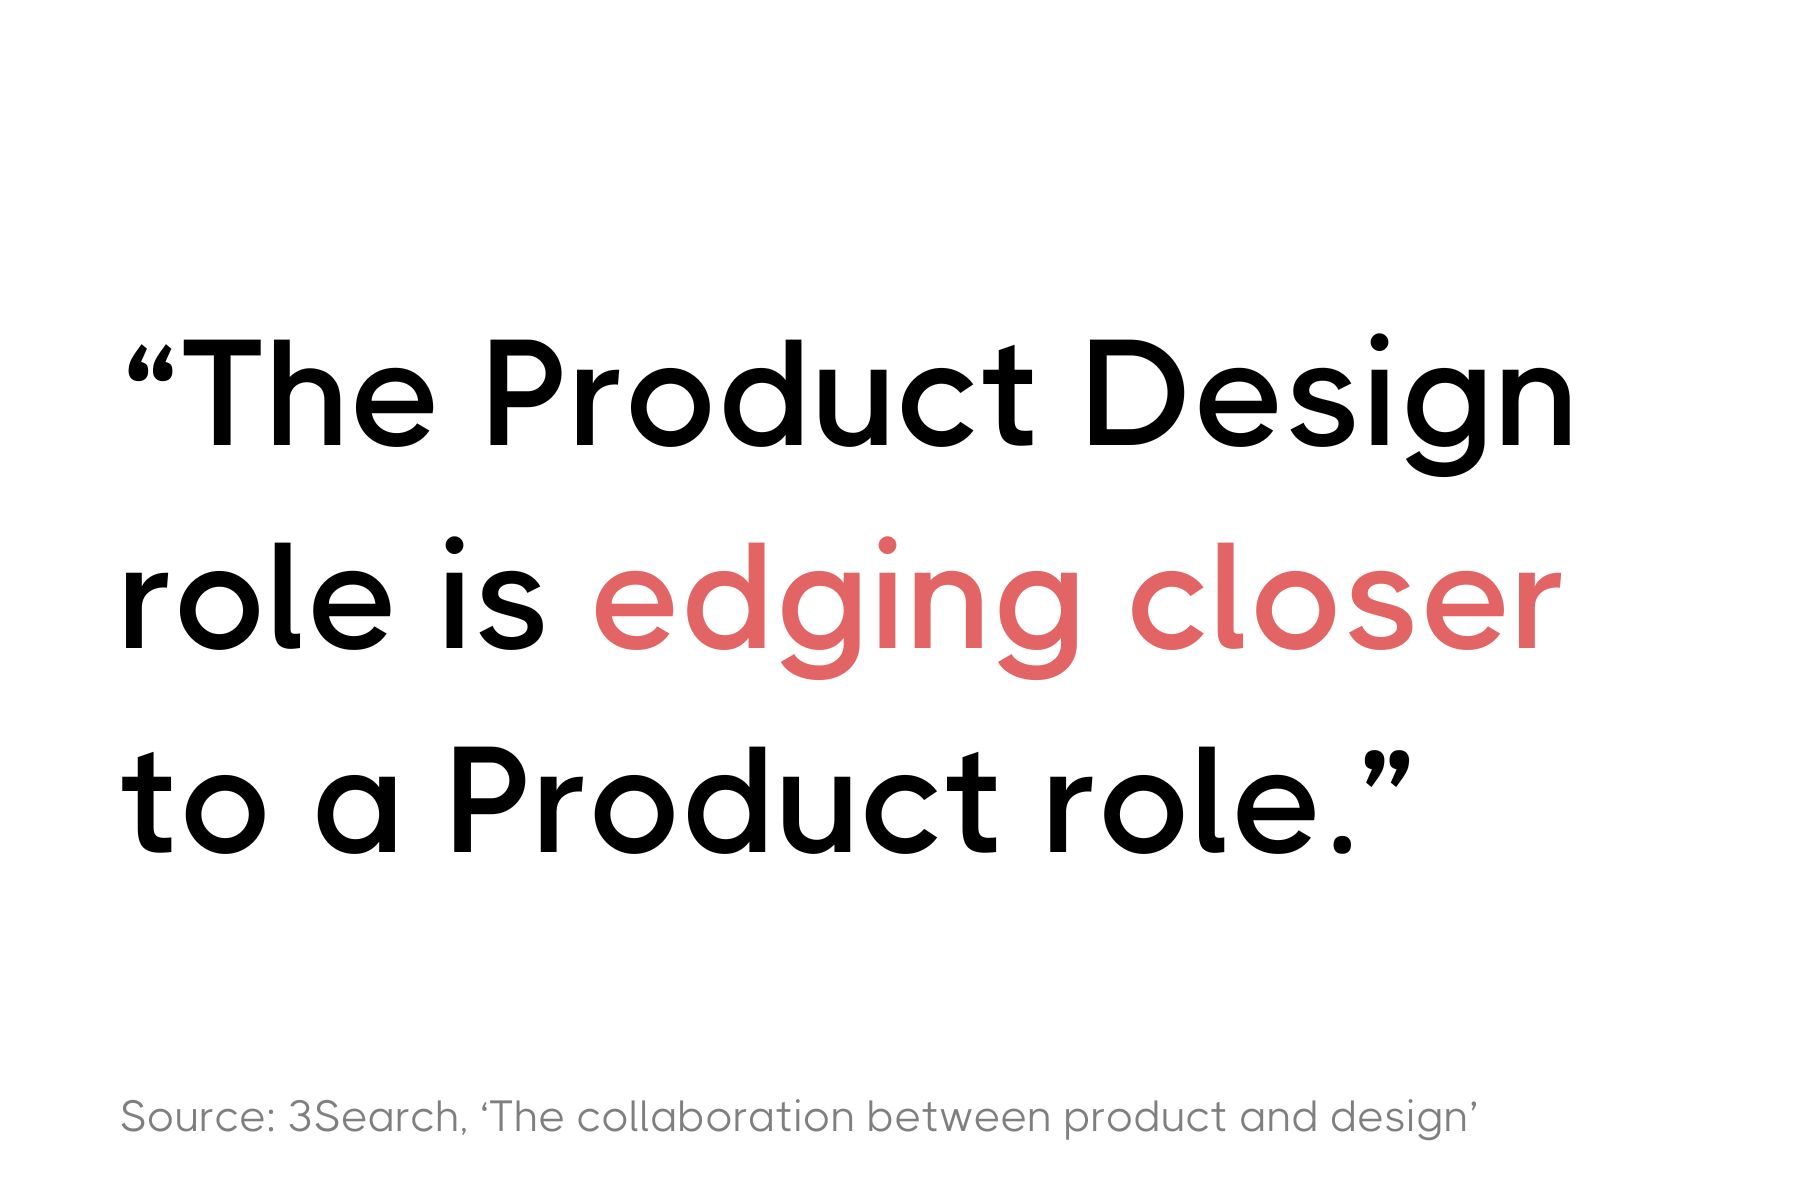 A simple text graphic displaying the quote: "The Product Design role is edging closer to a Product role." The text is in red and black and cited from a source titled 'The collaboration between product and design' by 3Search.